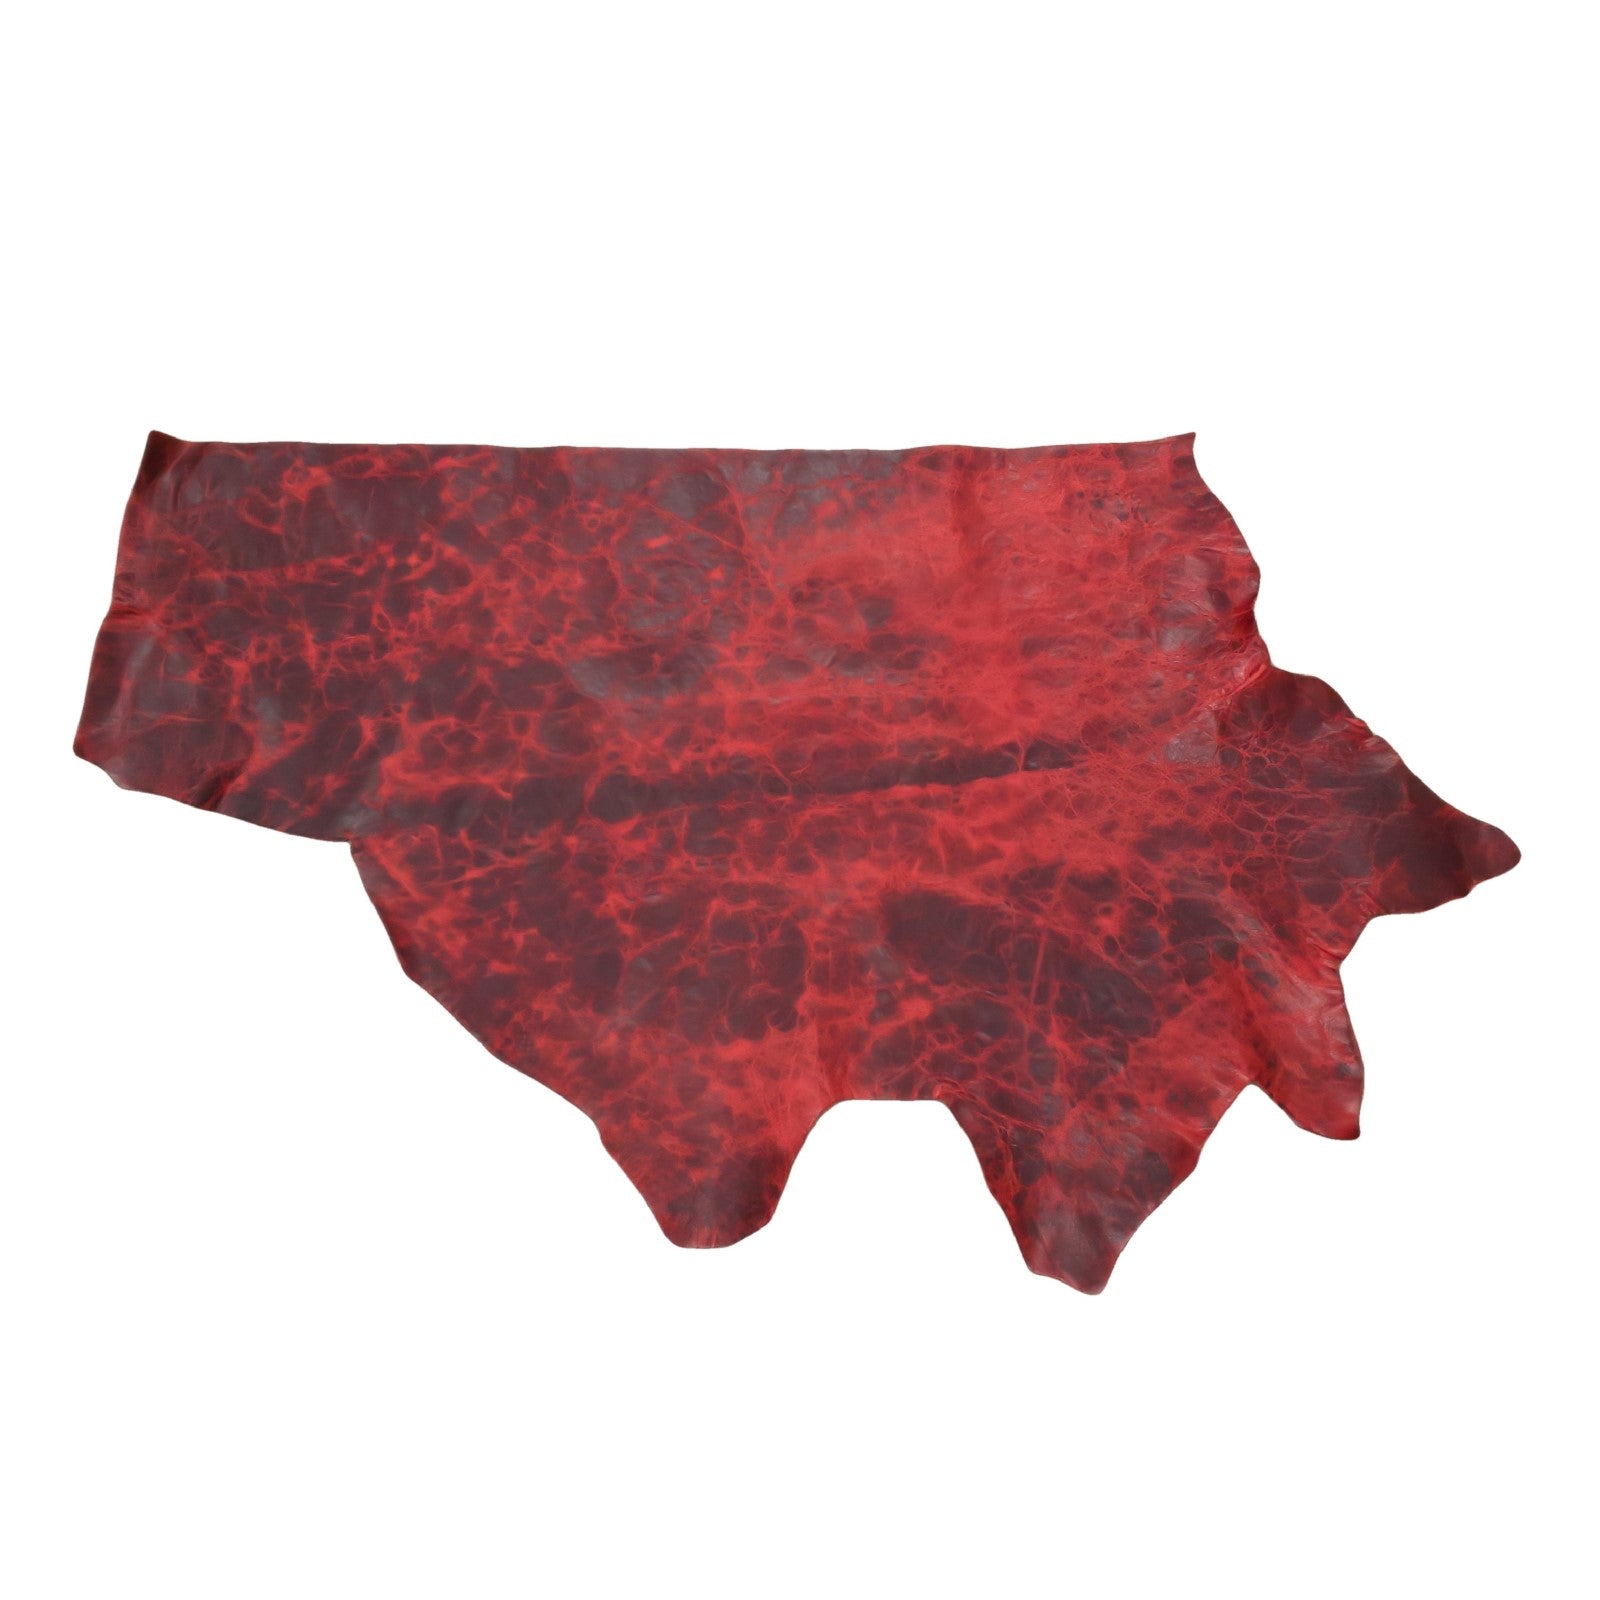 Homestead Red, 6.5-35 SqFt, 3-4 oz, Cow Sides & Pieces, Longhorn, 6.5-7.5 / Project Piece (Bottom) | The Leather Guy